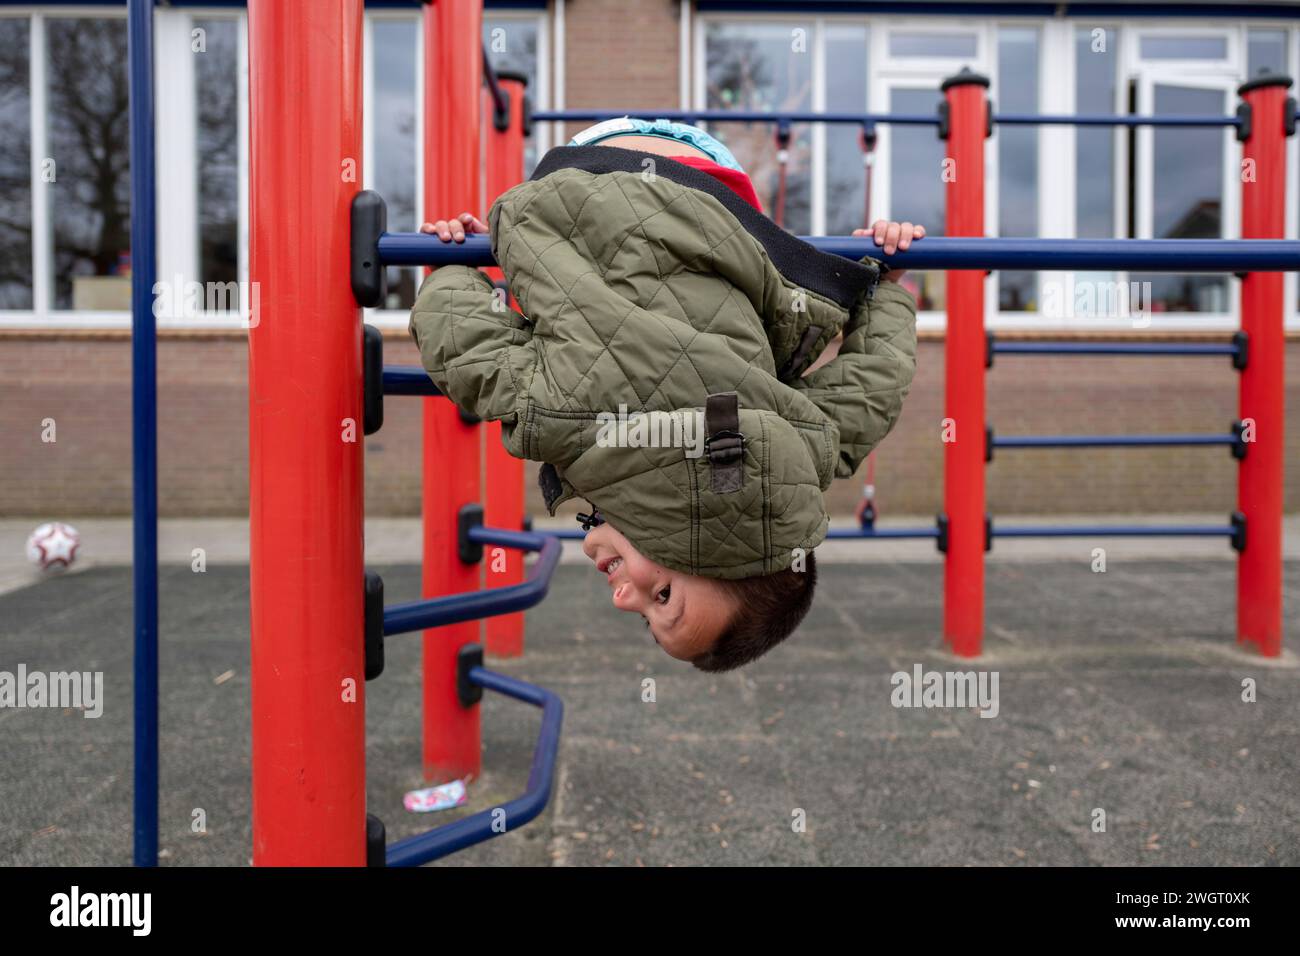 Boy jumping through bars at a park, swinging over the top Stock Photo